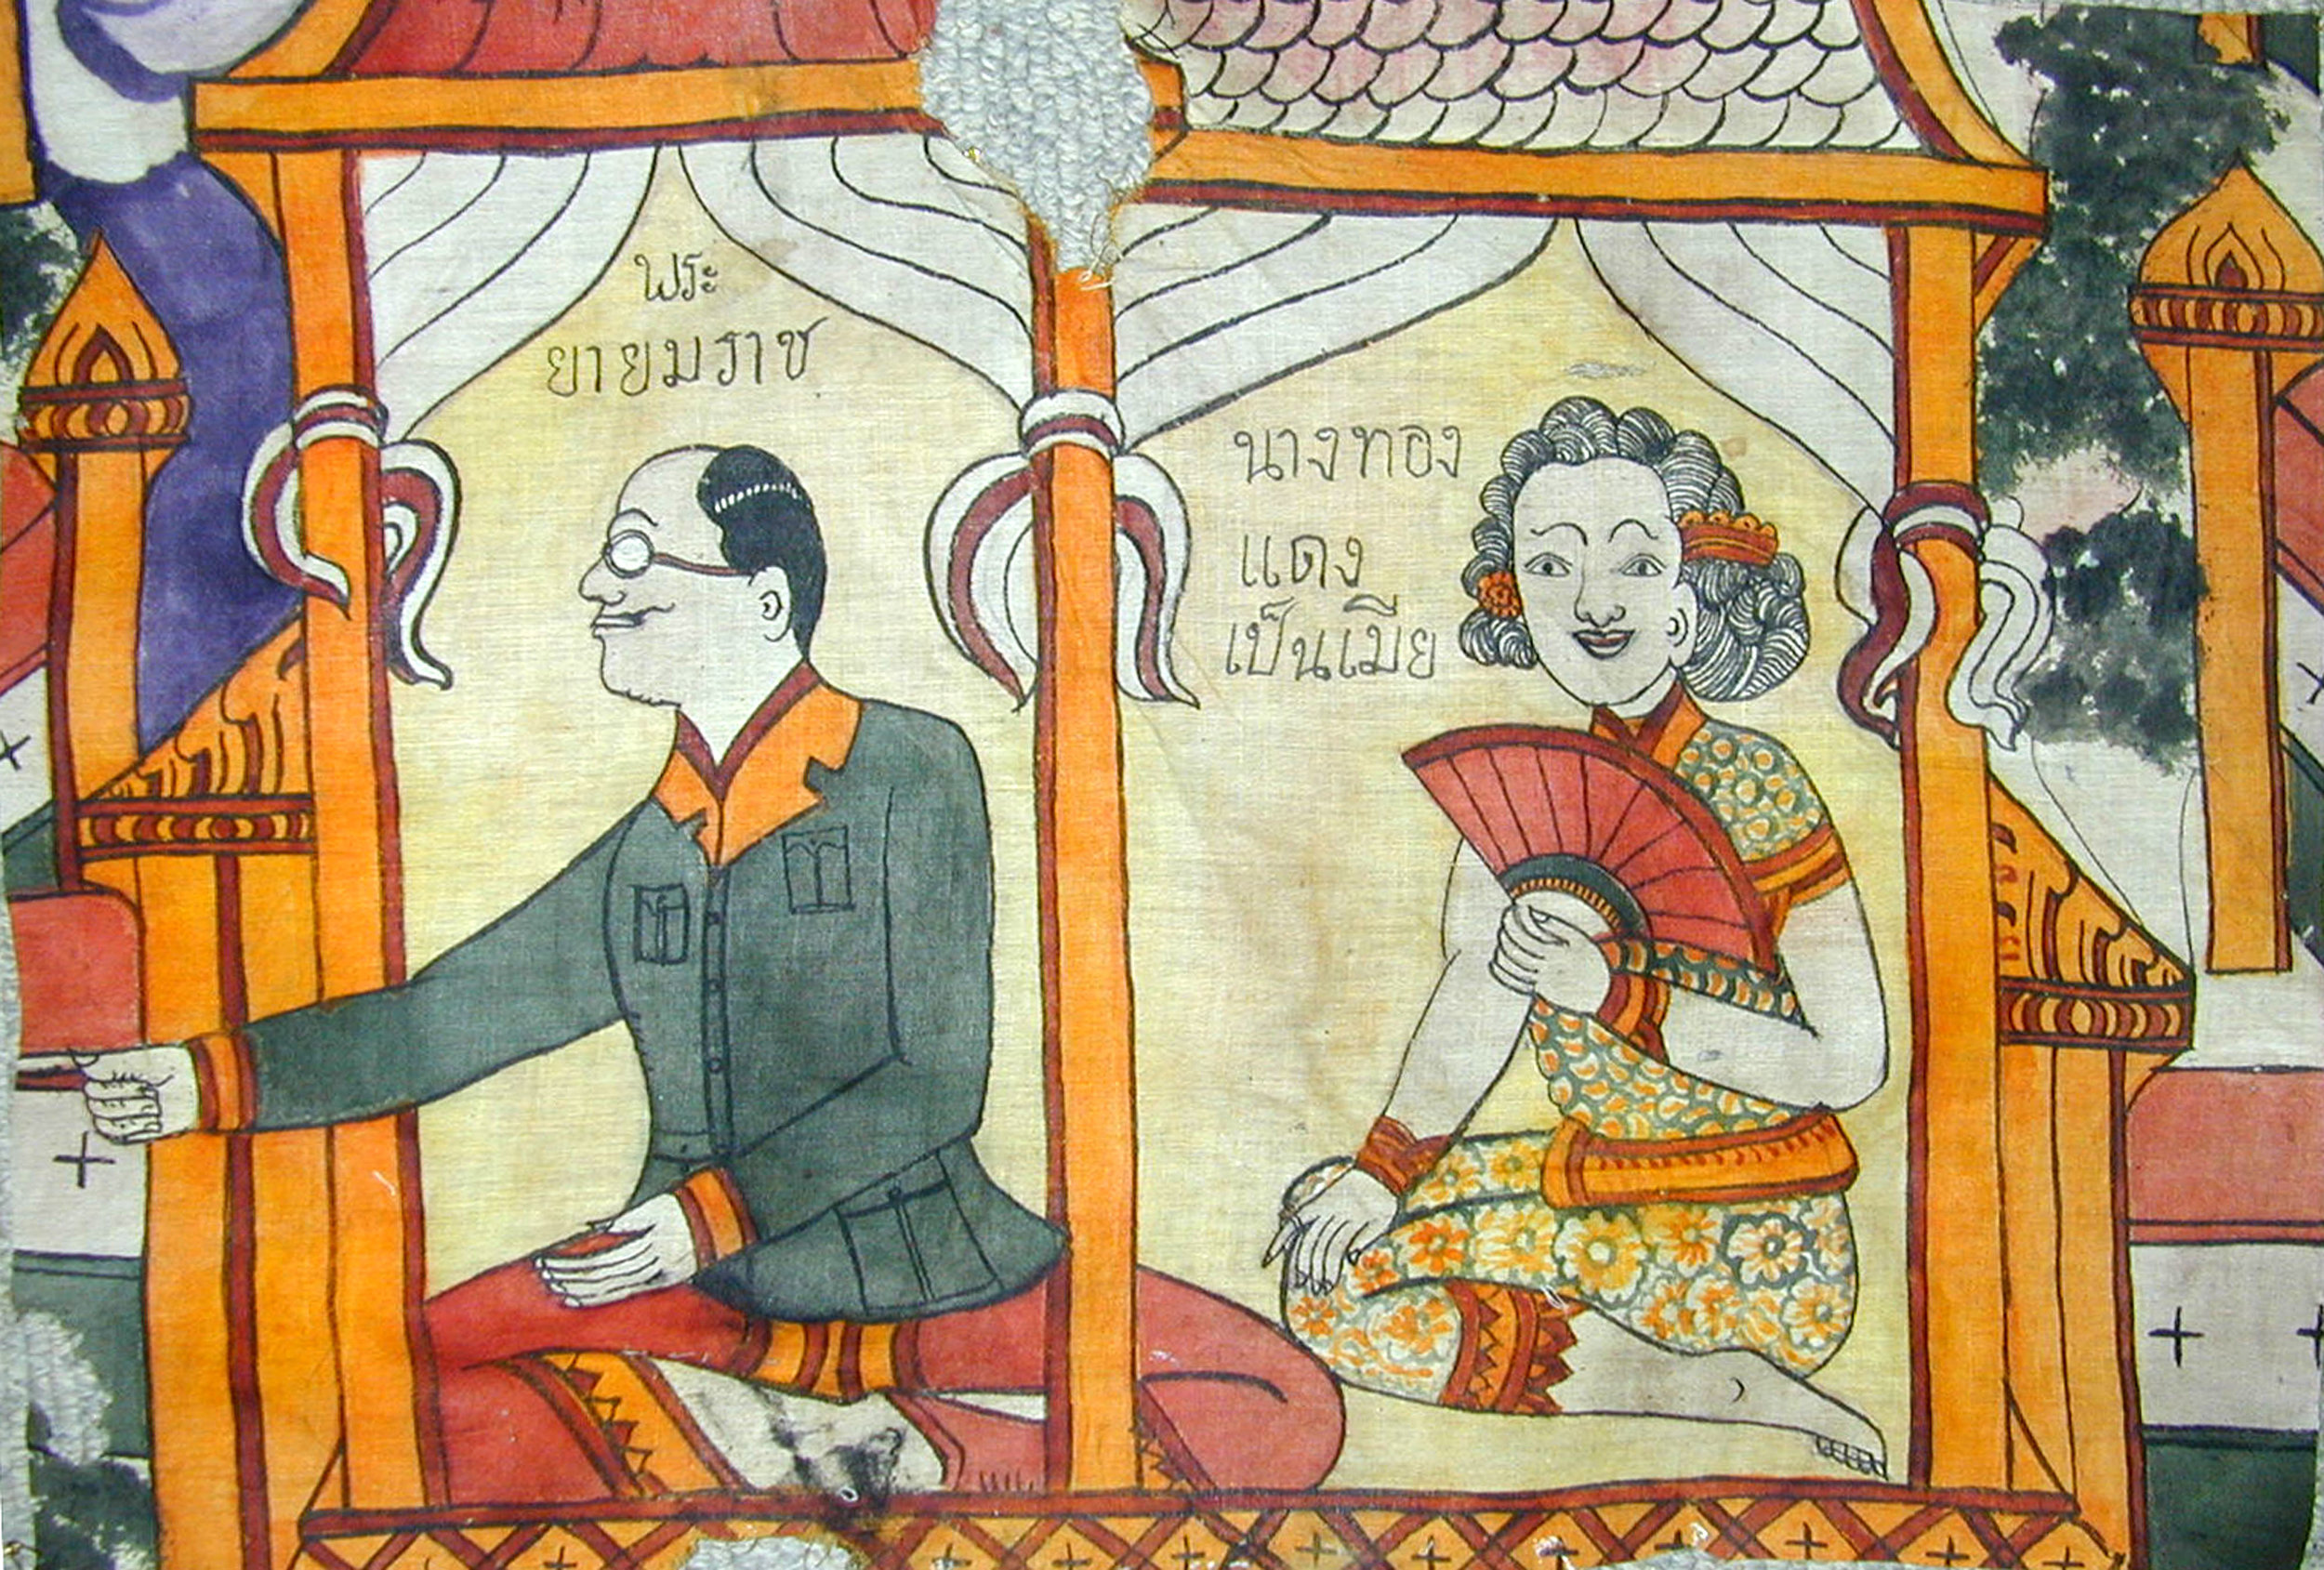 Temple painting on cloth, Siam, early to mid 20th century, fragment.